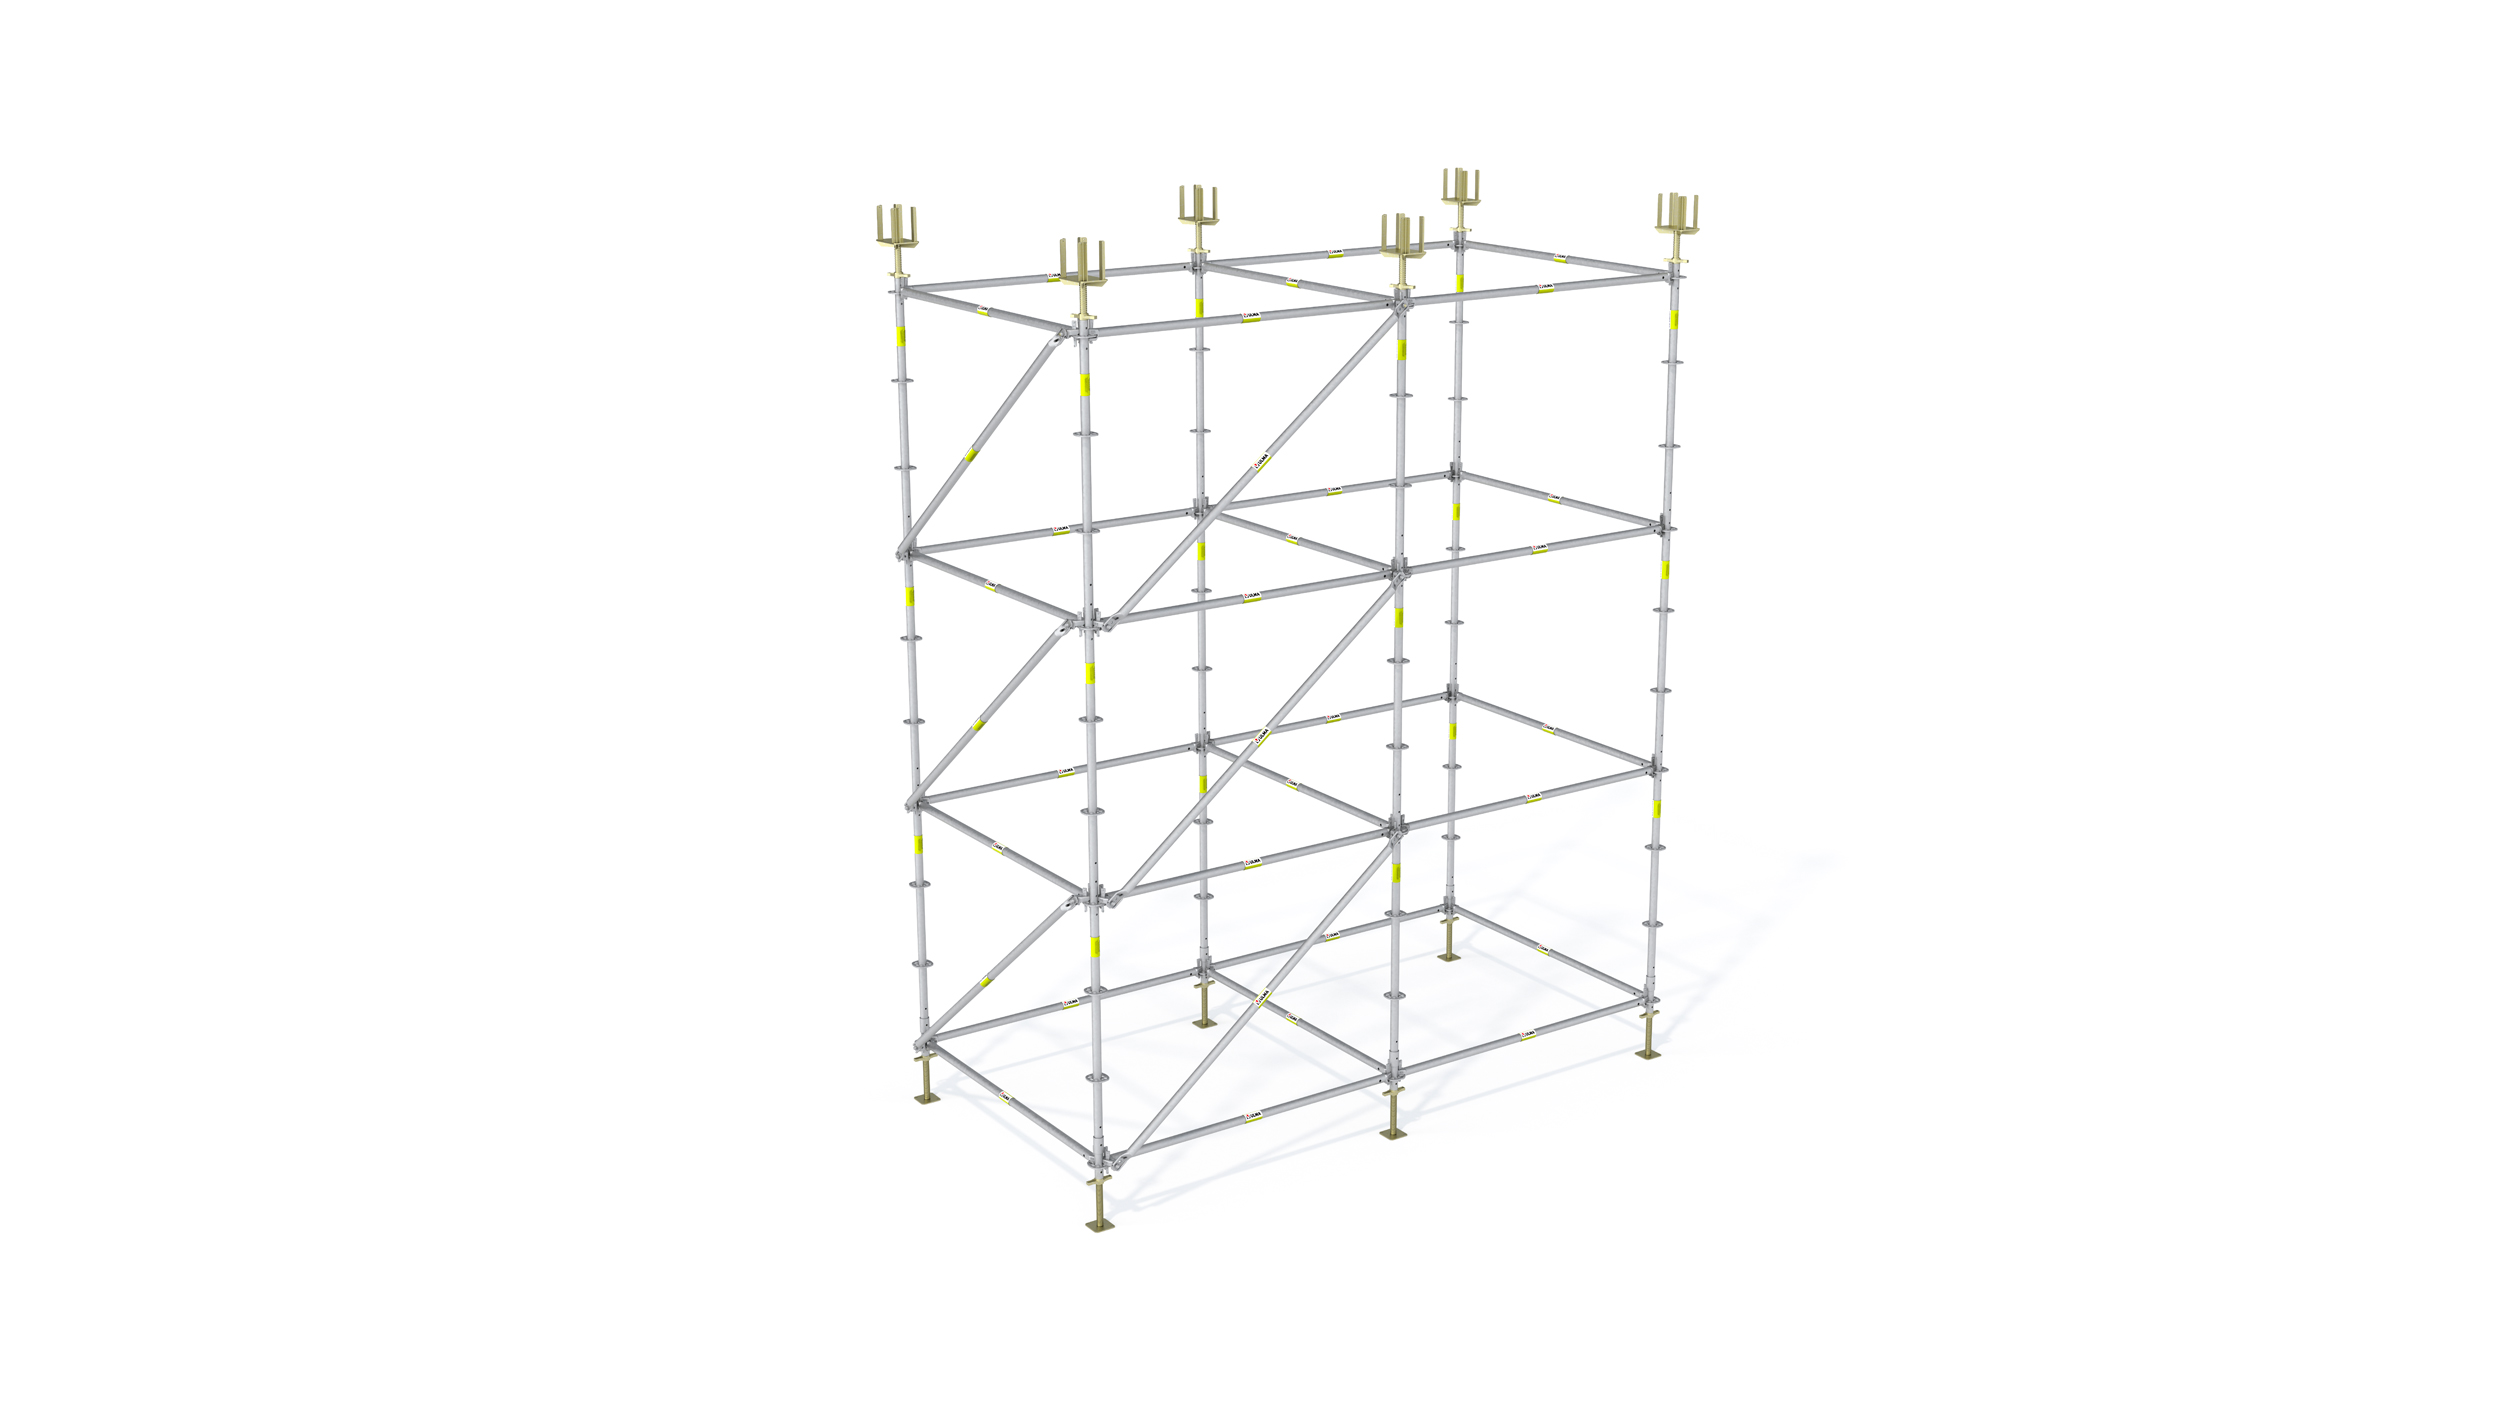 Extremely flexible concrete shoring system. Multiple tower configurations can be erected, quick and easily. Mainly oriented towards building construction.